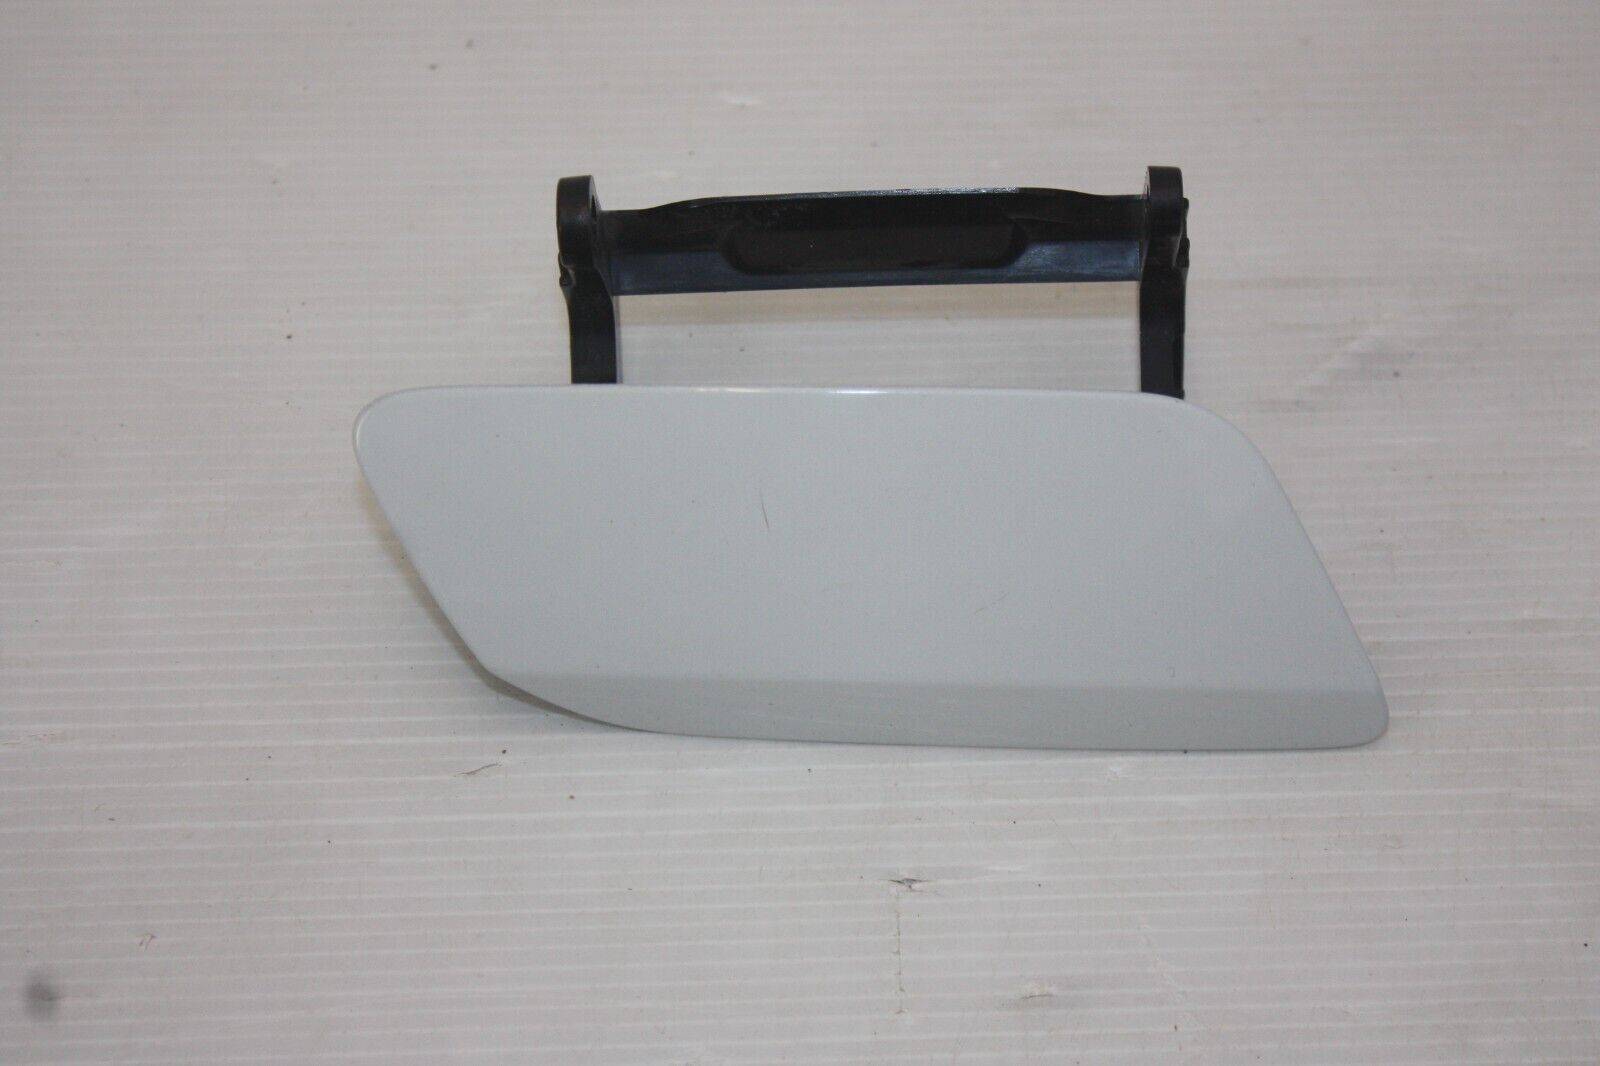 Audi A6 C8 Front Bumper Right Side Tow Cover 4K0807788B Genuine NEED RESPRAY 175910463083